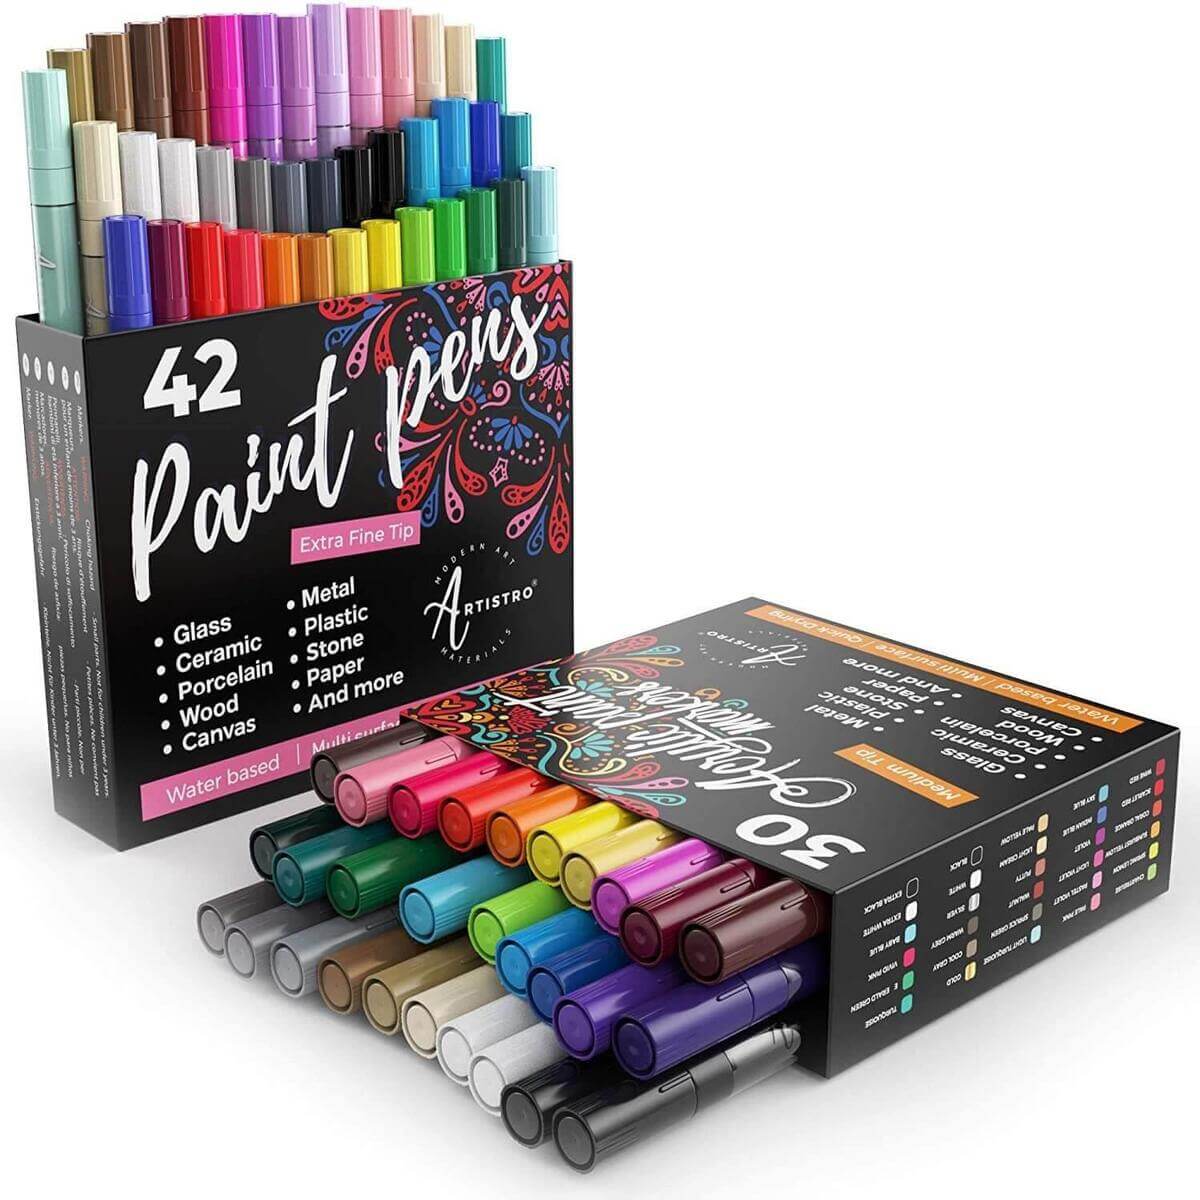 60 Markers for Art 30 Acrylic Extra Fine Tip Paint Pens 30 Acrylic Medium Tip  Paint Pens for Rock, Wood, Glass, Ceramic, Metal Painting 